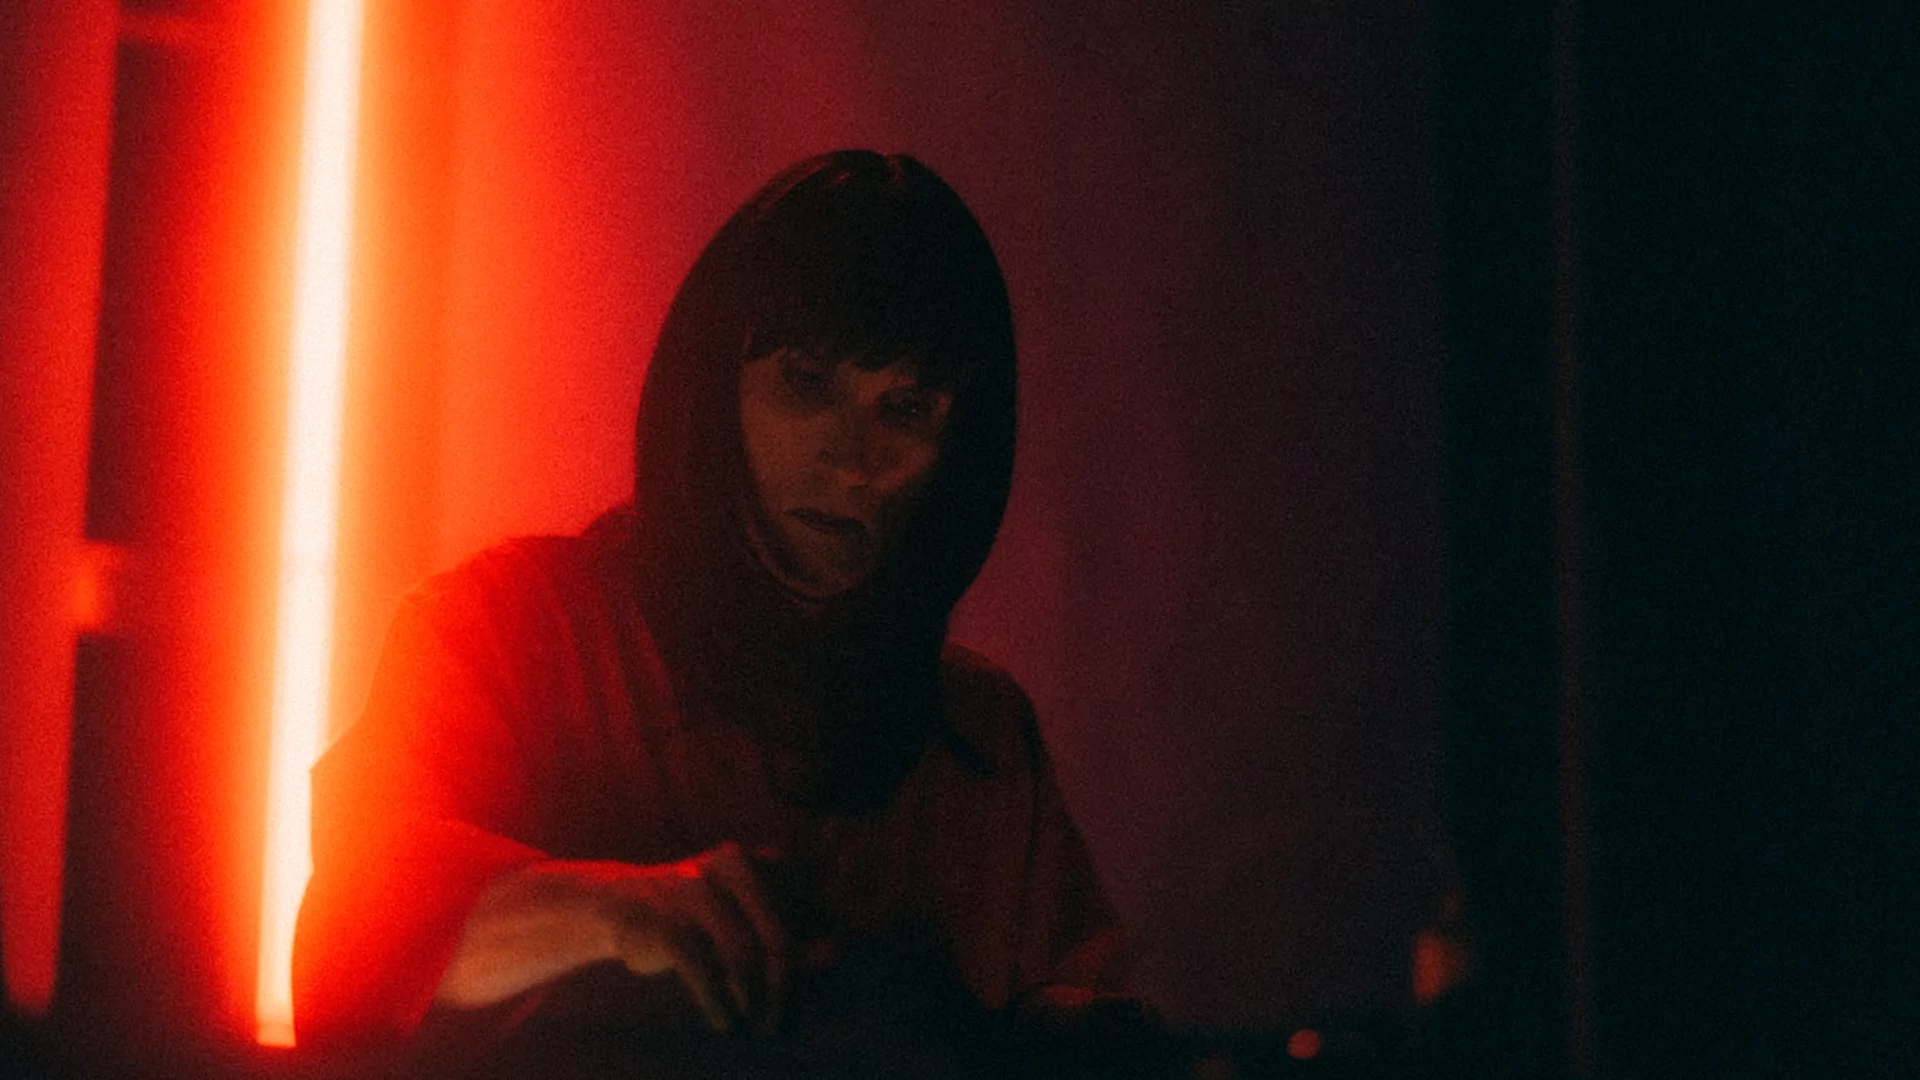 Photo of Rrose DJing in a dark club with a red strip light behind them